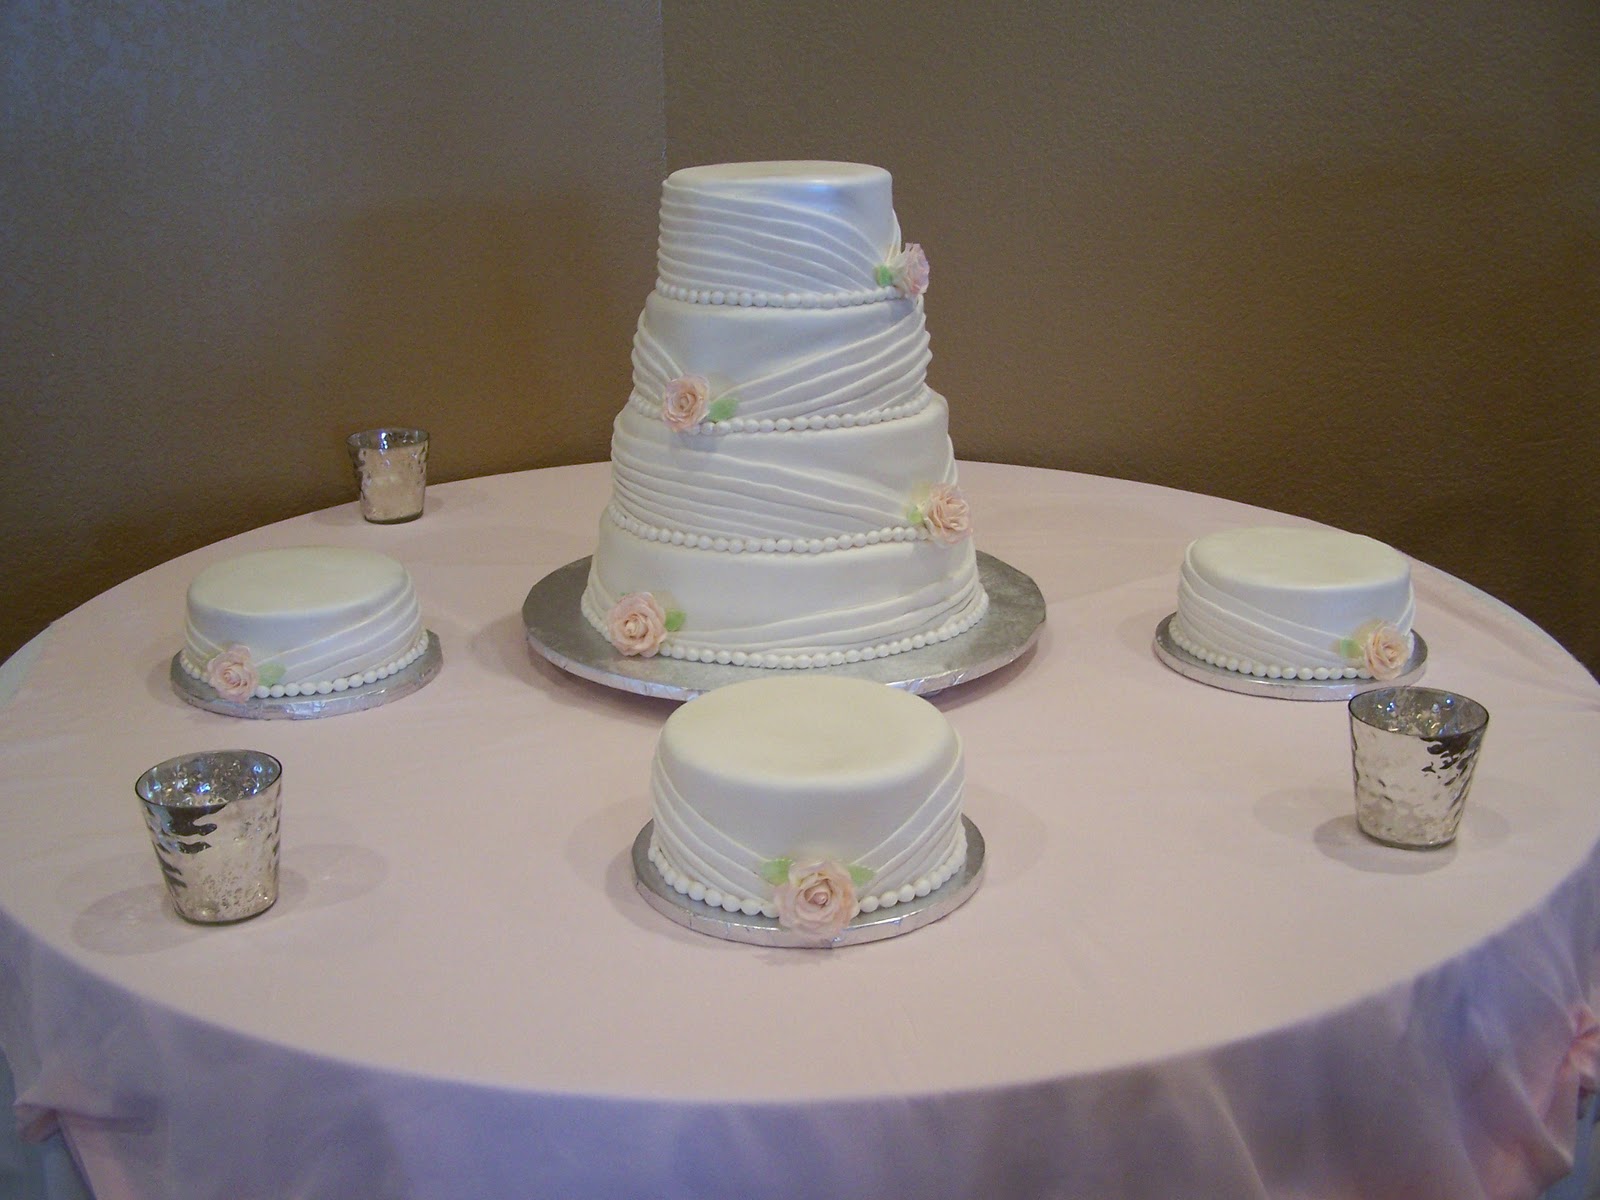 traditional wedding cake purple Pleated wrapped wedding cake with matching side cakes,